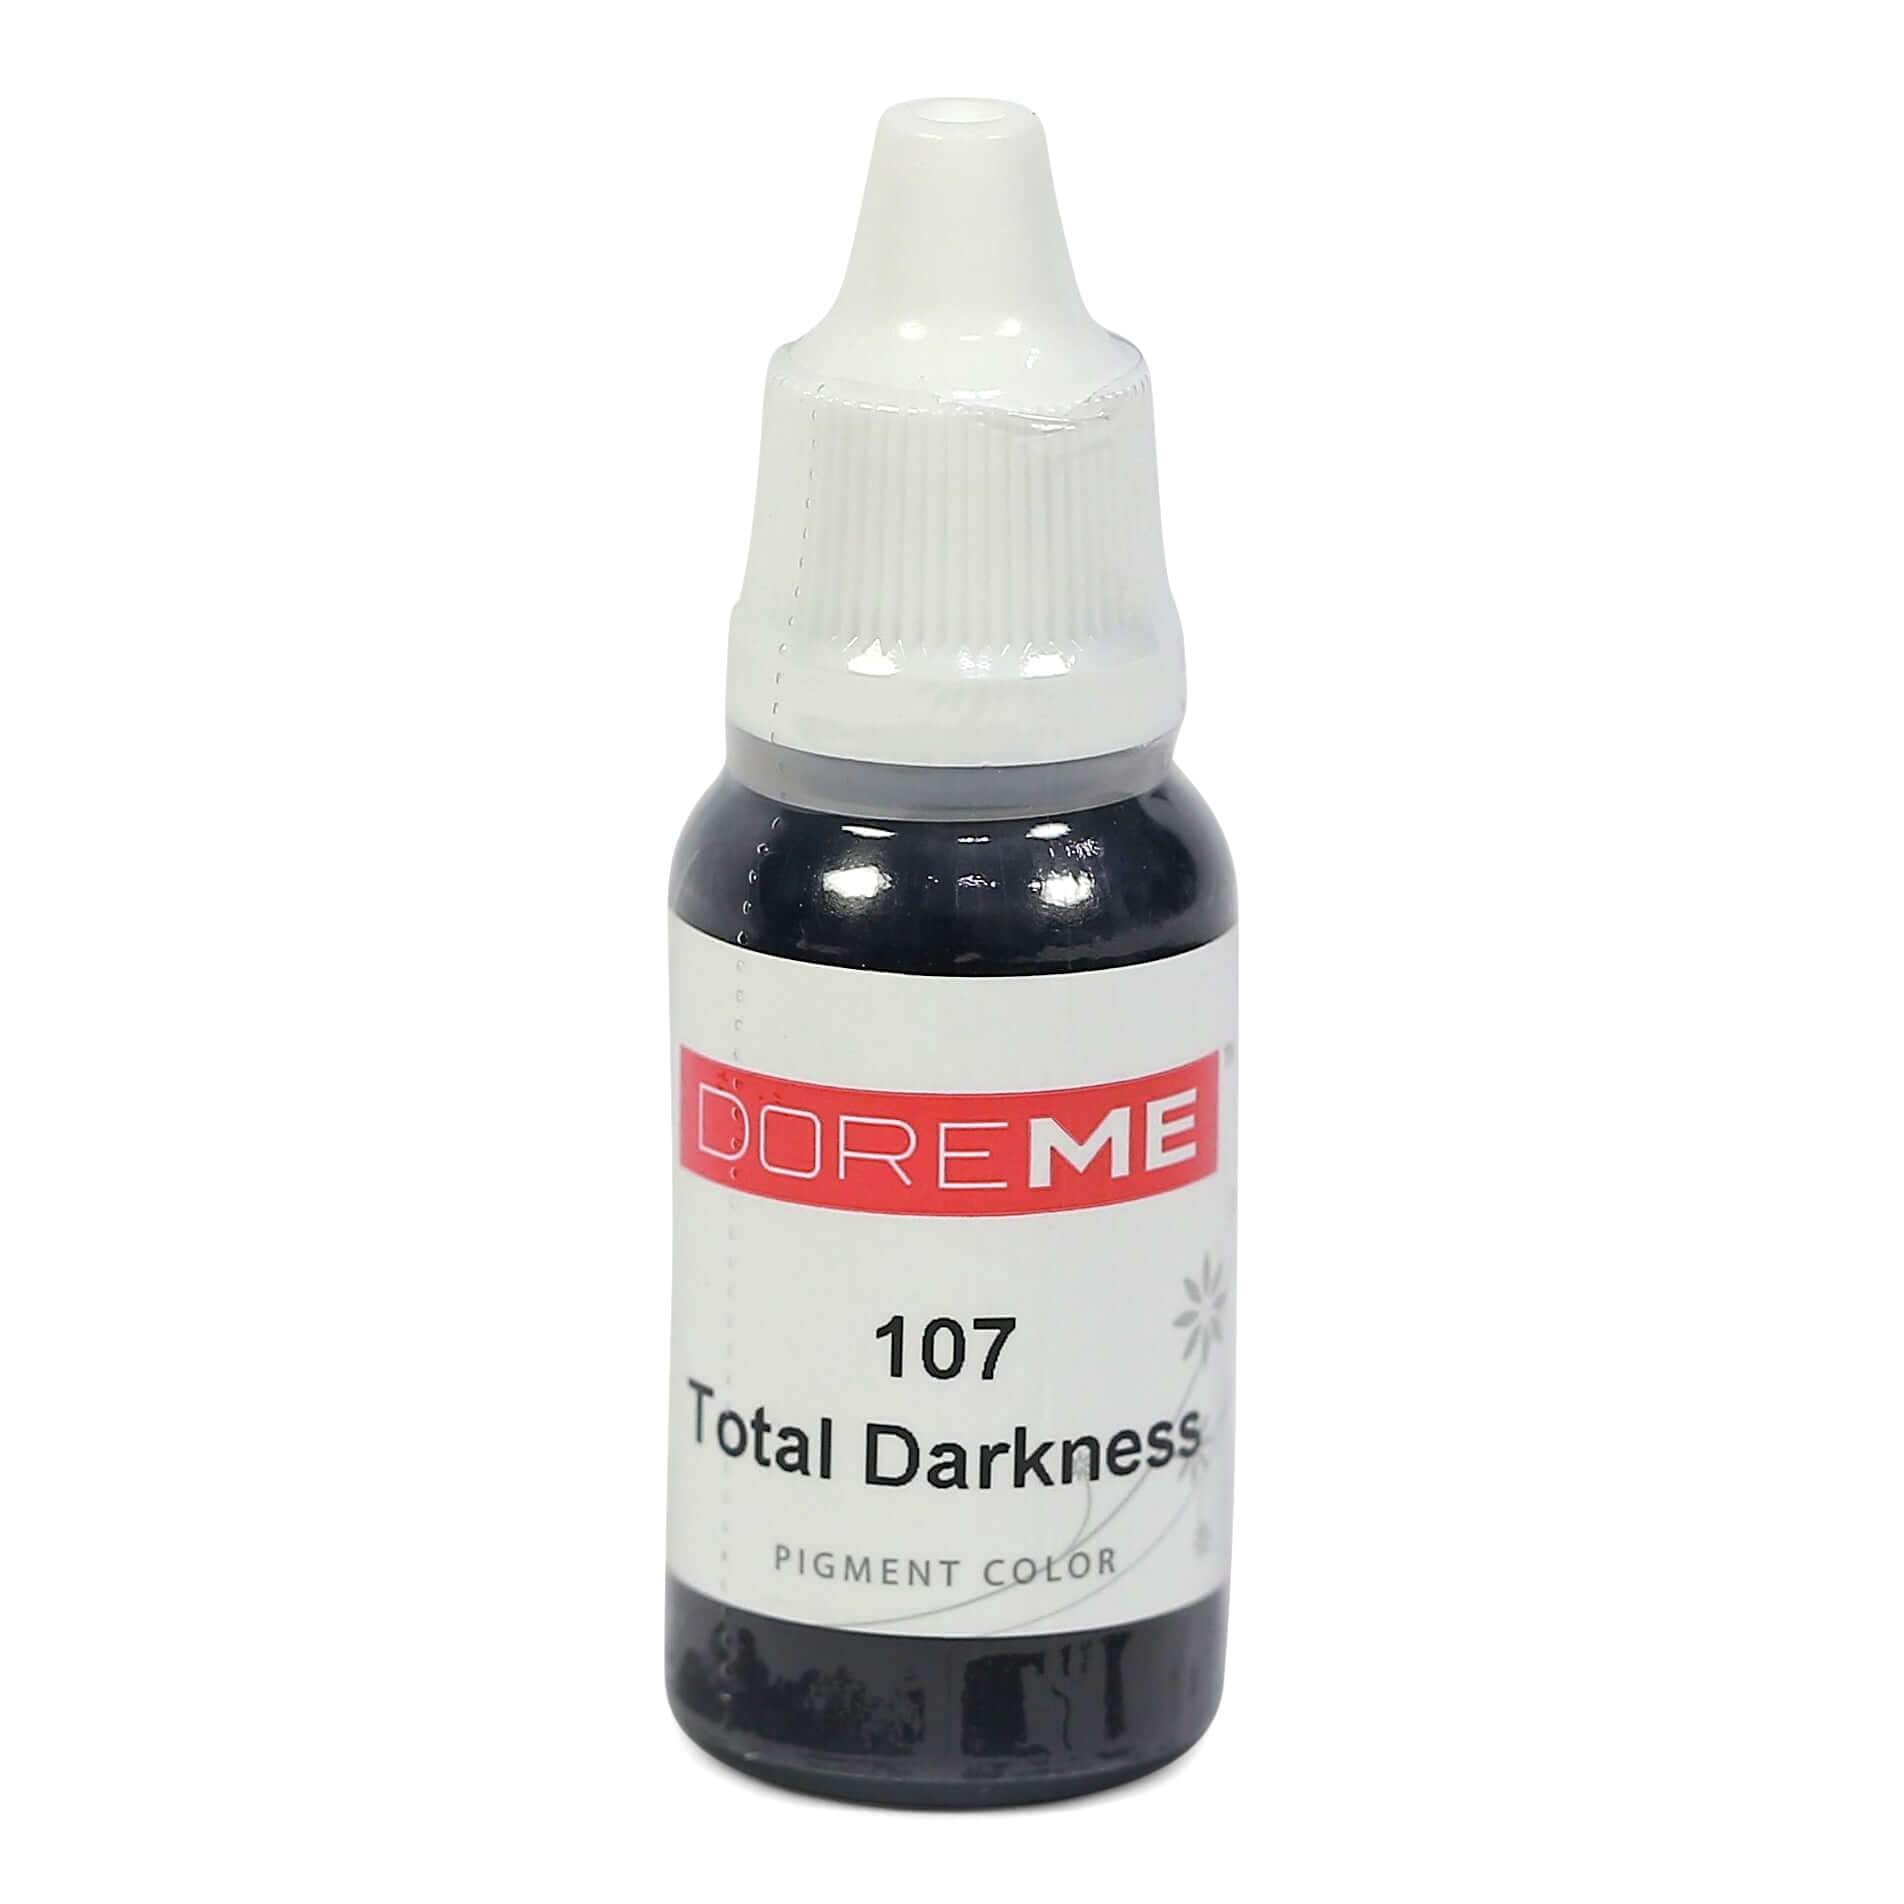 Permanent Makeup pigments Doreme Micropigmentation Eyebrow, Eyeliner, Lip Colours 107 Total Darkness (c) - Beautiful Ink UK trade and wholesale supplier